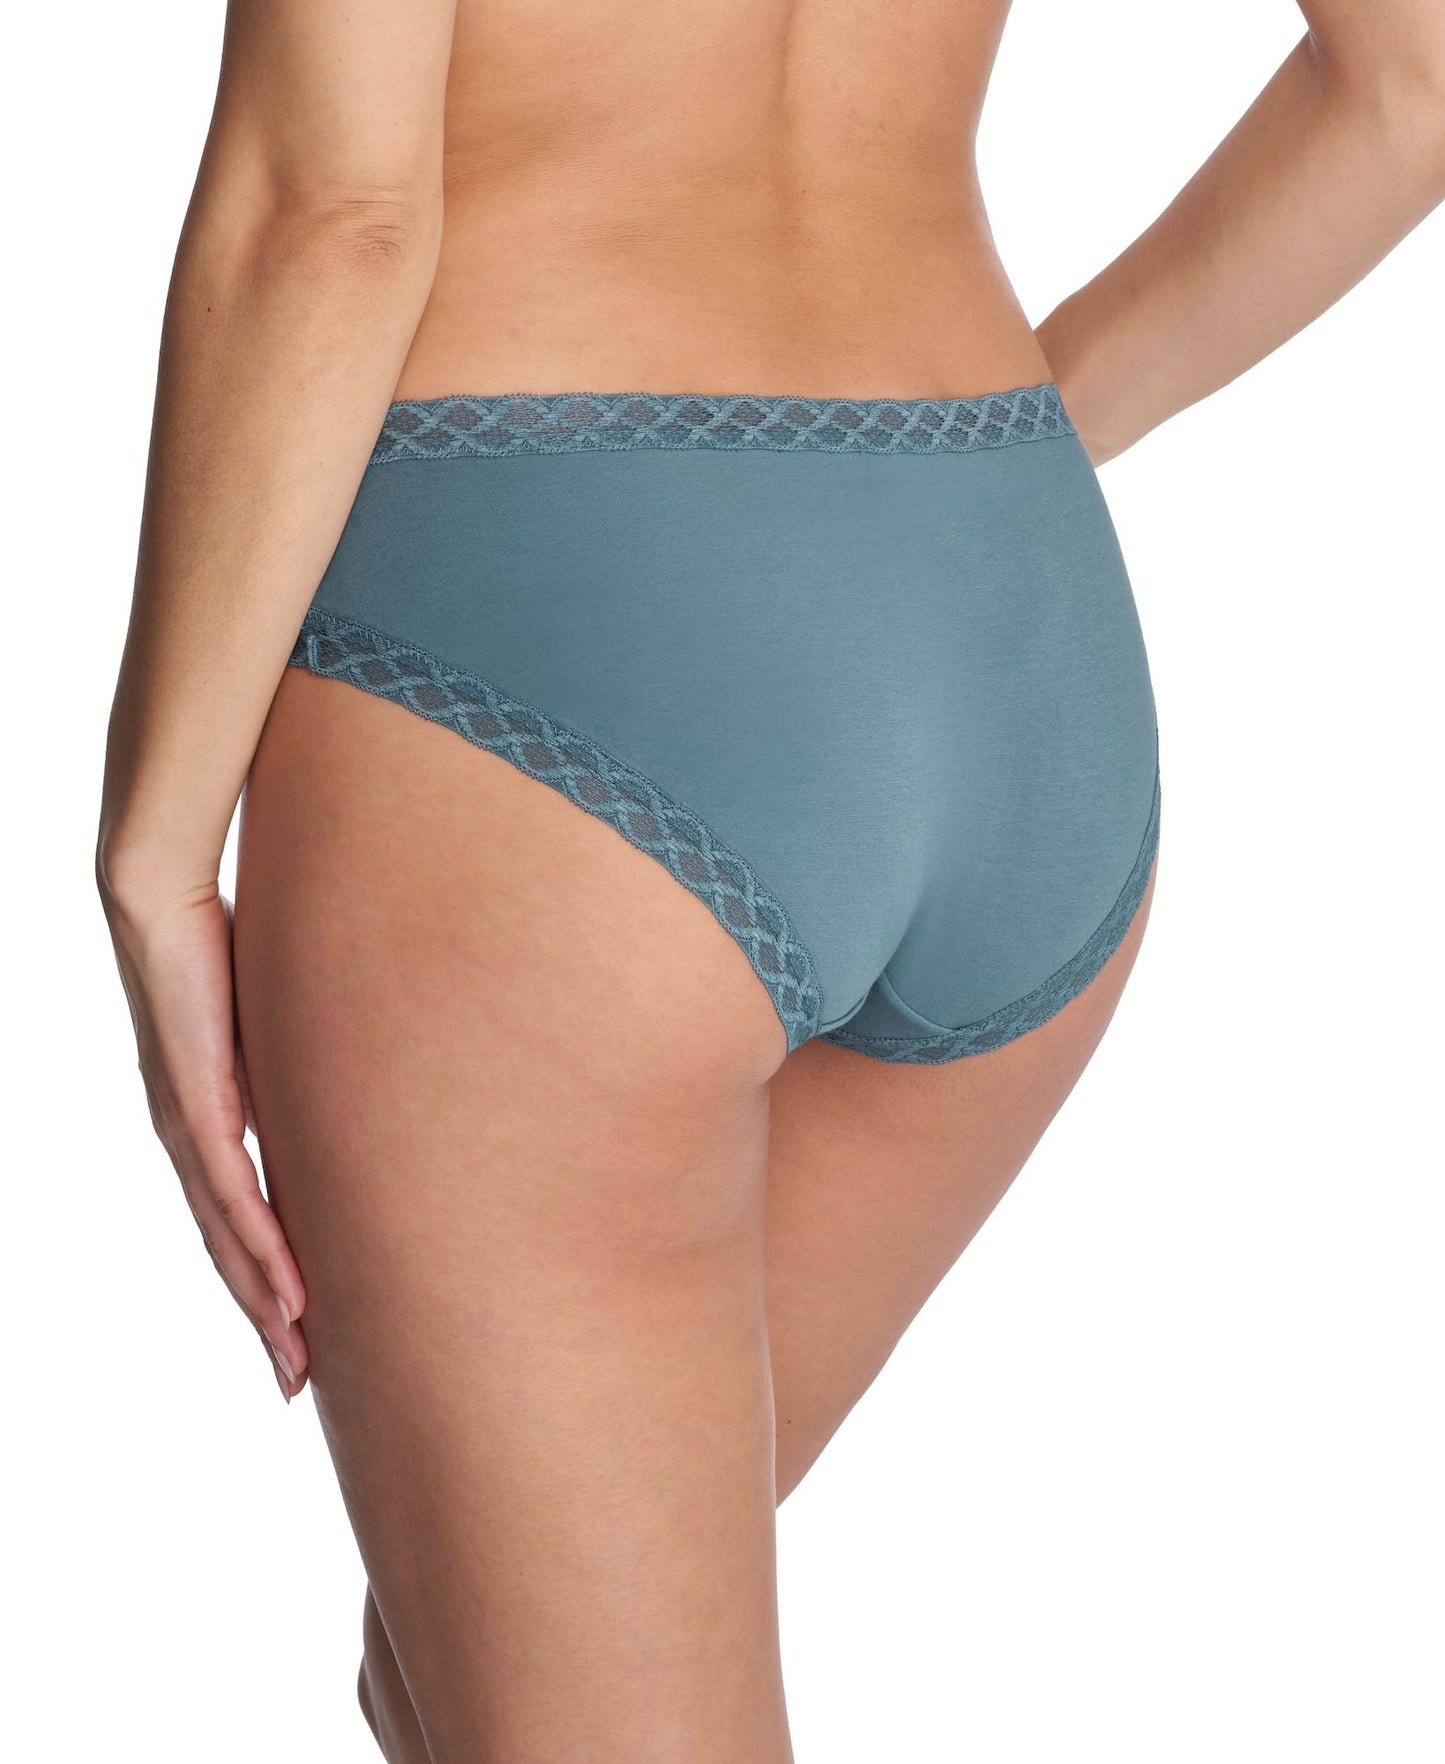 Bliss Girl brief - winter colors